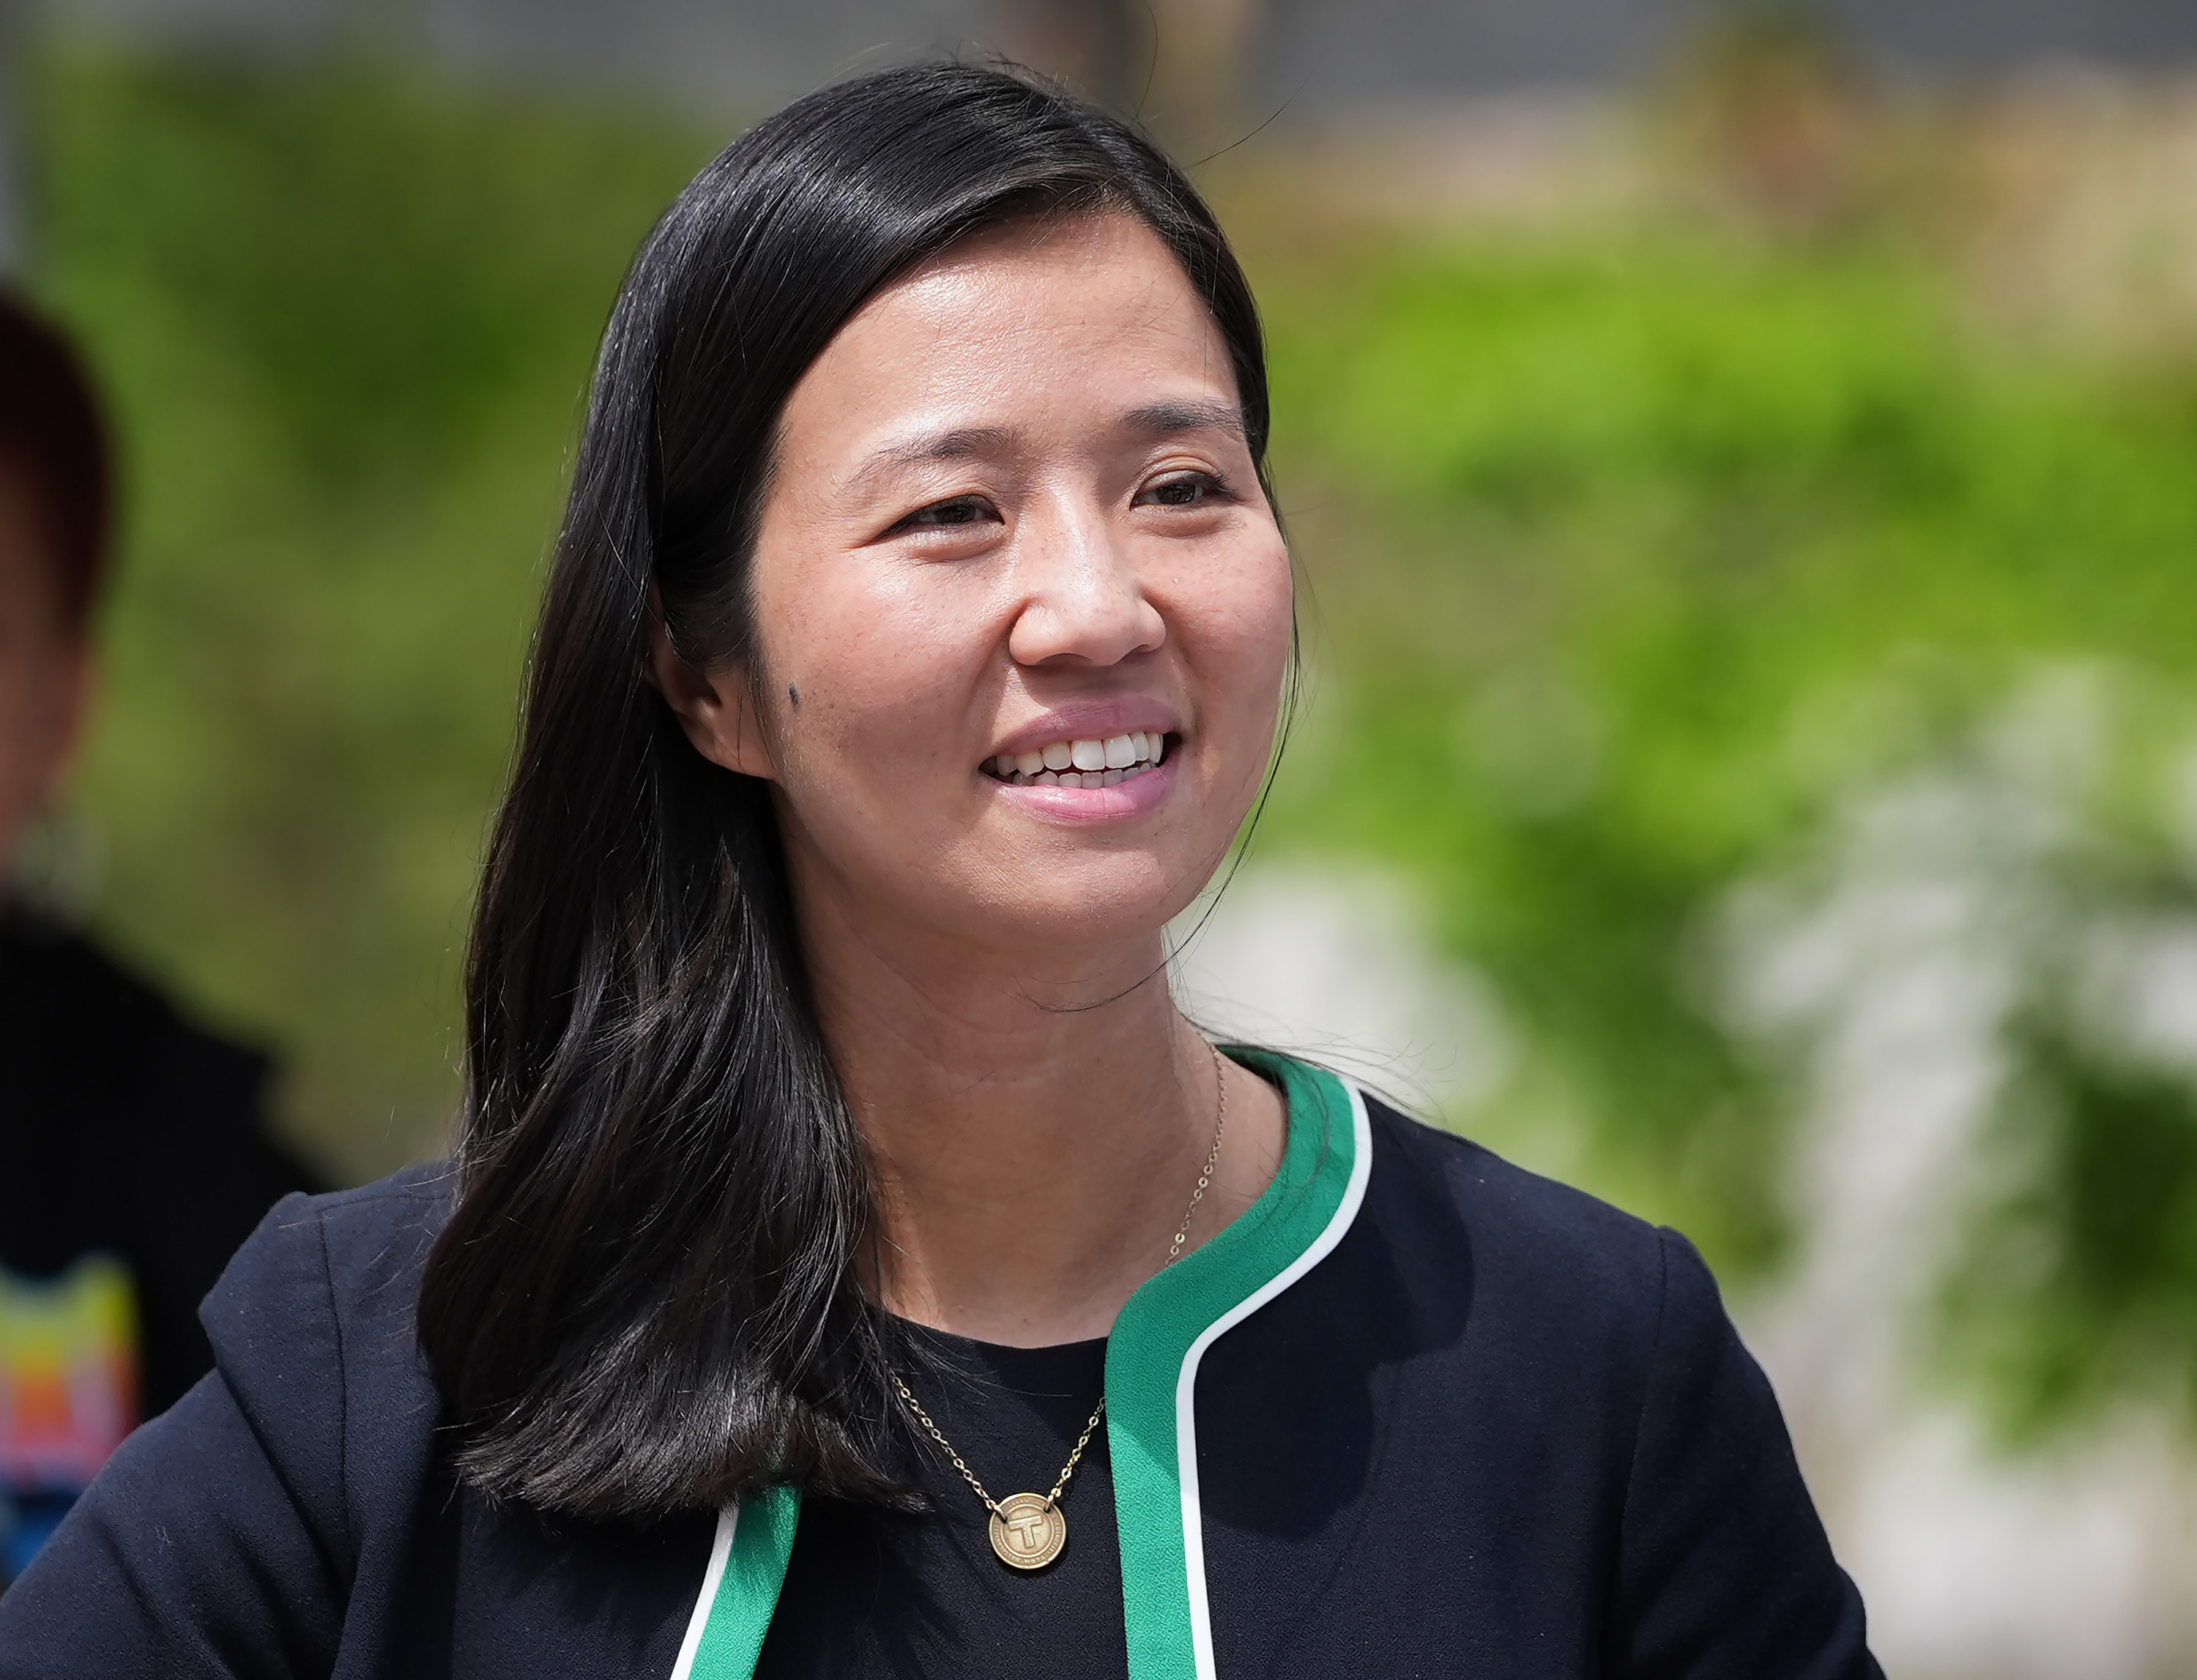 boston mayor michelle wu used campaign funds for ‘electeds of color’ holiday party, records show